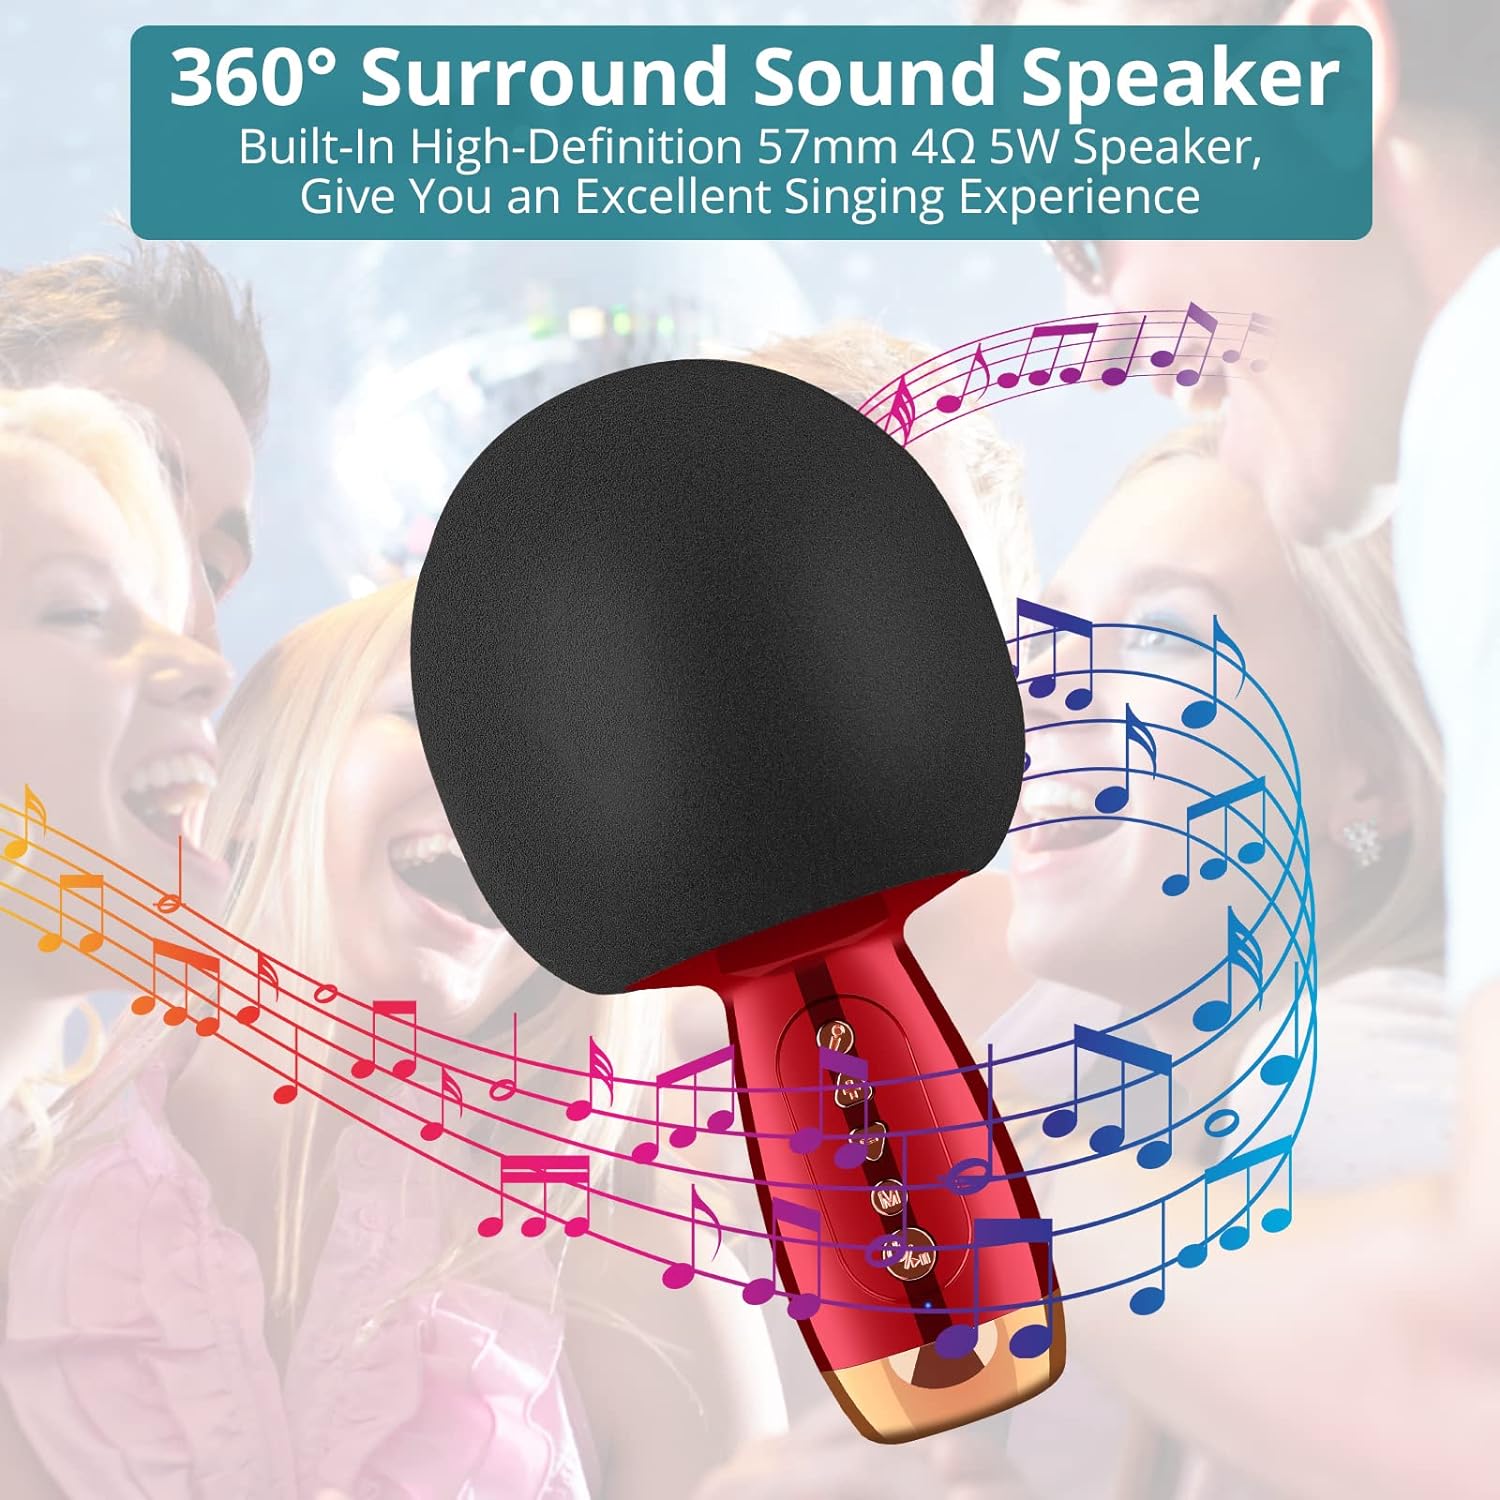 Wireless Bluetooth Karaoke Microphone,Variable Sound 4-in-1 Portable Handheld Microphone for Girls Kids Adults, Karaoke Speaker Machine, Support Android/iOS/PC for Home KTV, Party, Singing